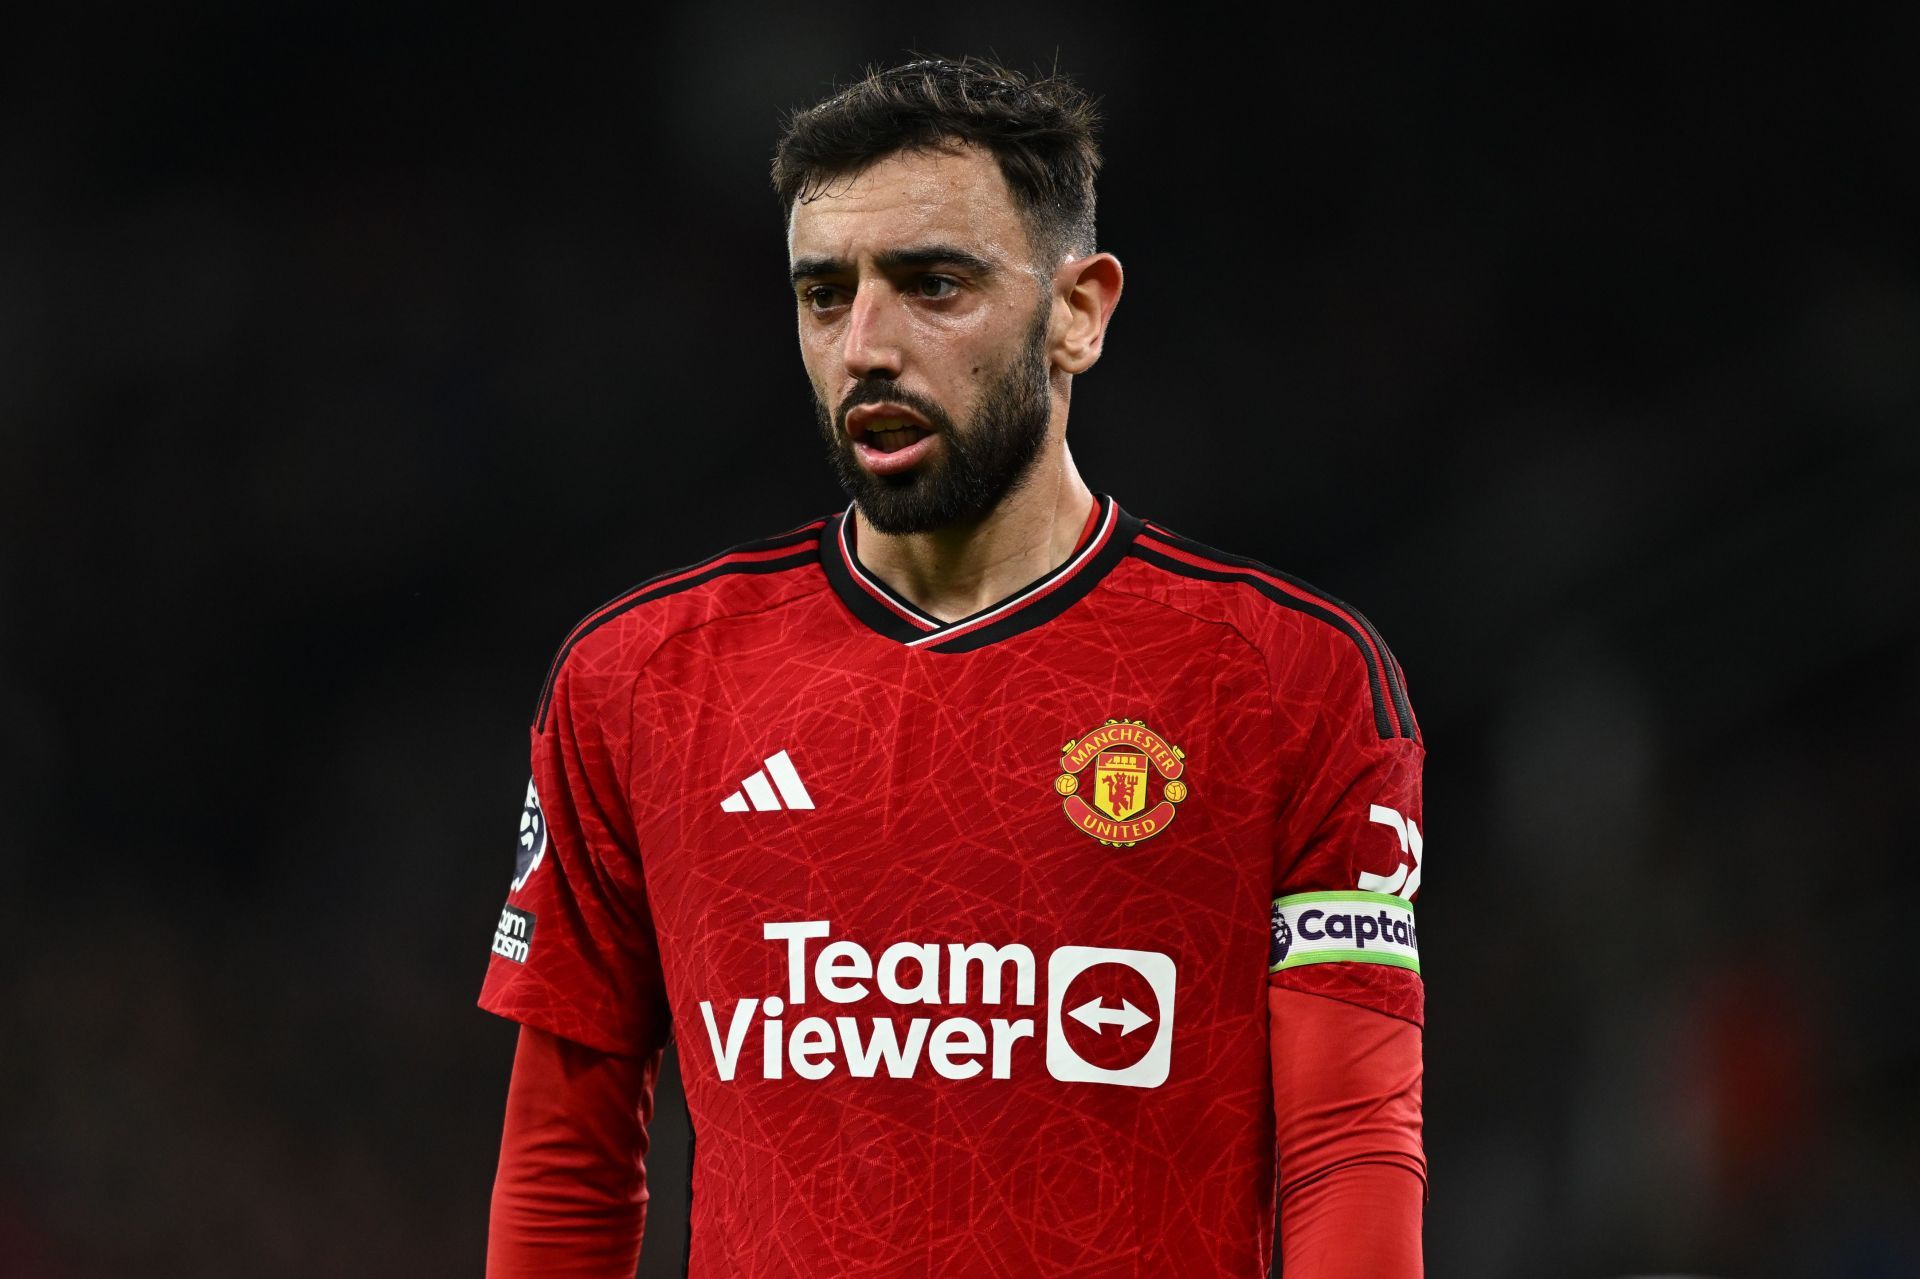 Fernandes could be on the move away from Manchester United.